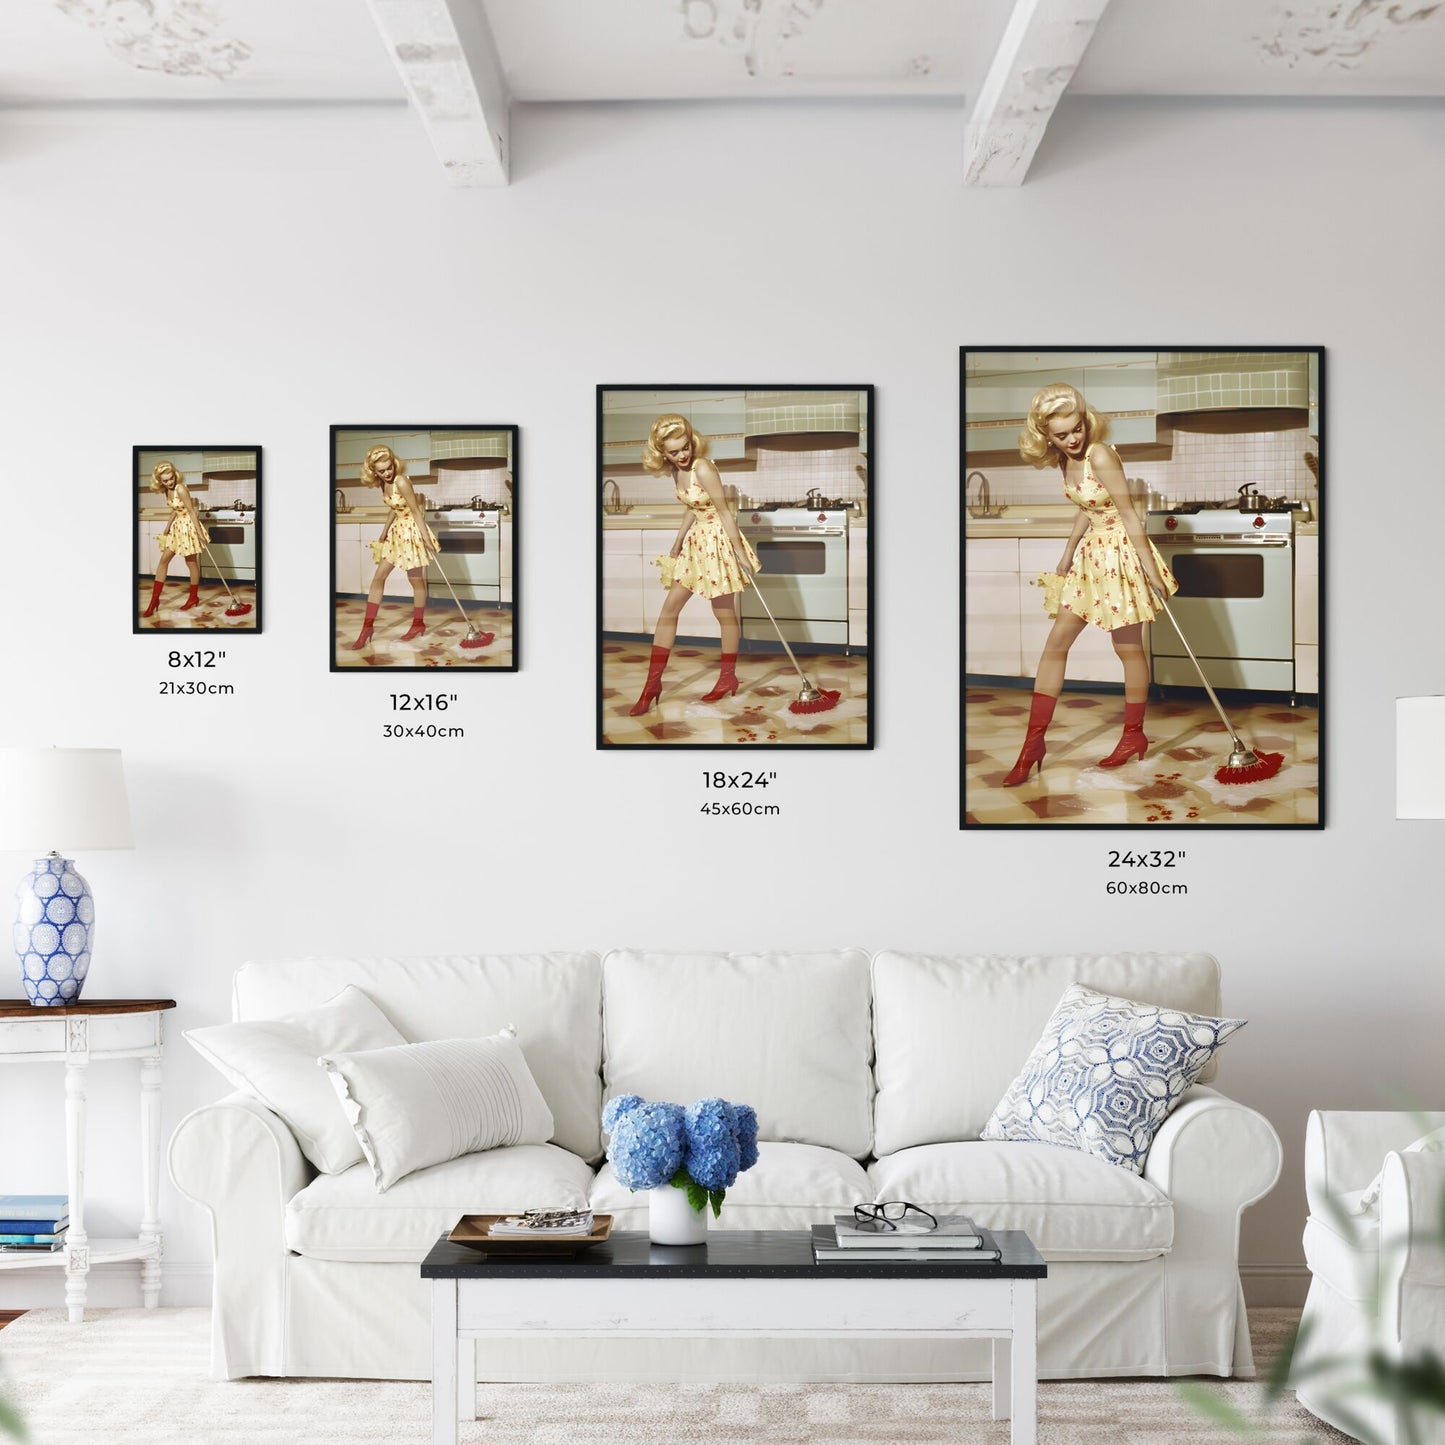 A housewife in a beautiful outfit is cleaning and she is happy, her face is very beautiful - Art print of a woman in a dress sweeping the floor Default Title